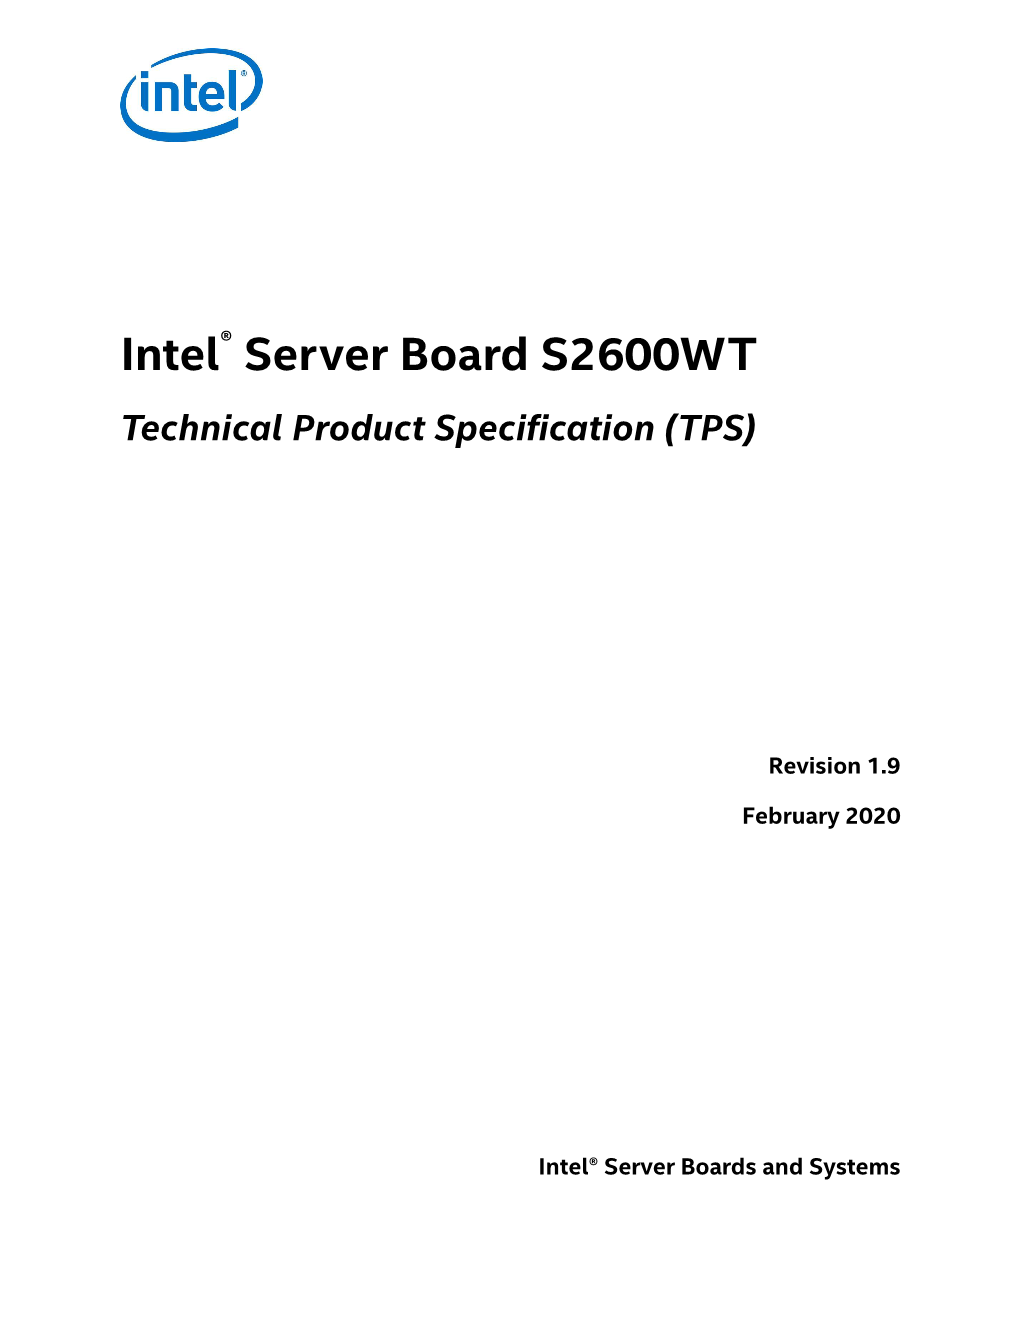 Intel® Server Board S2600WT Technical Product Specification (TPS)